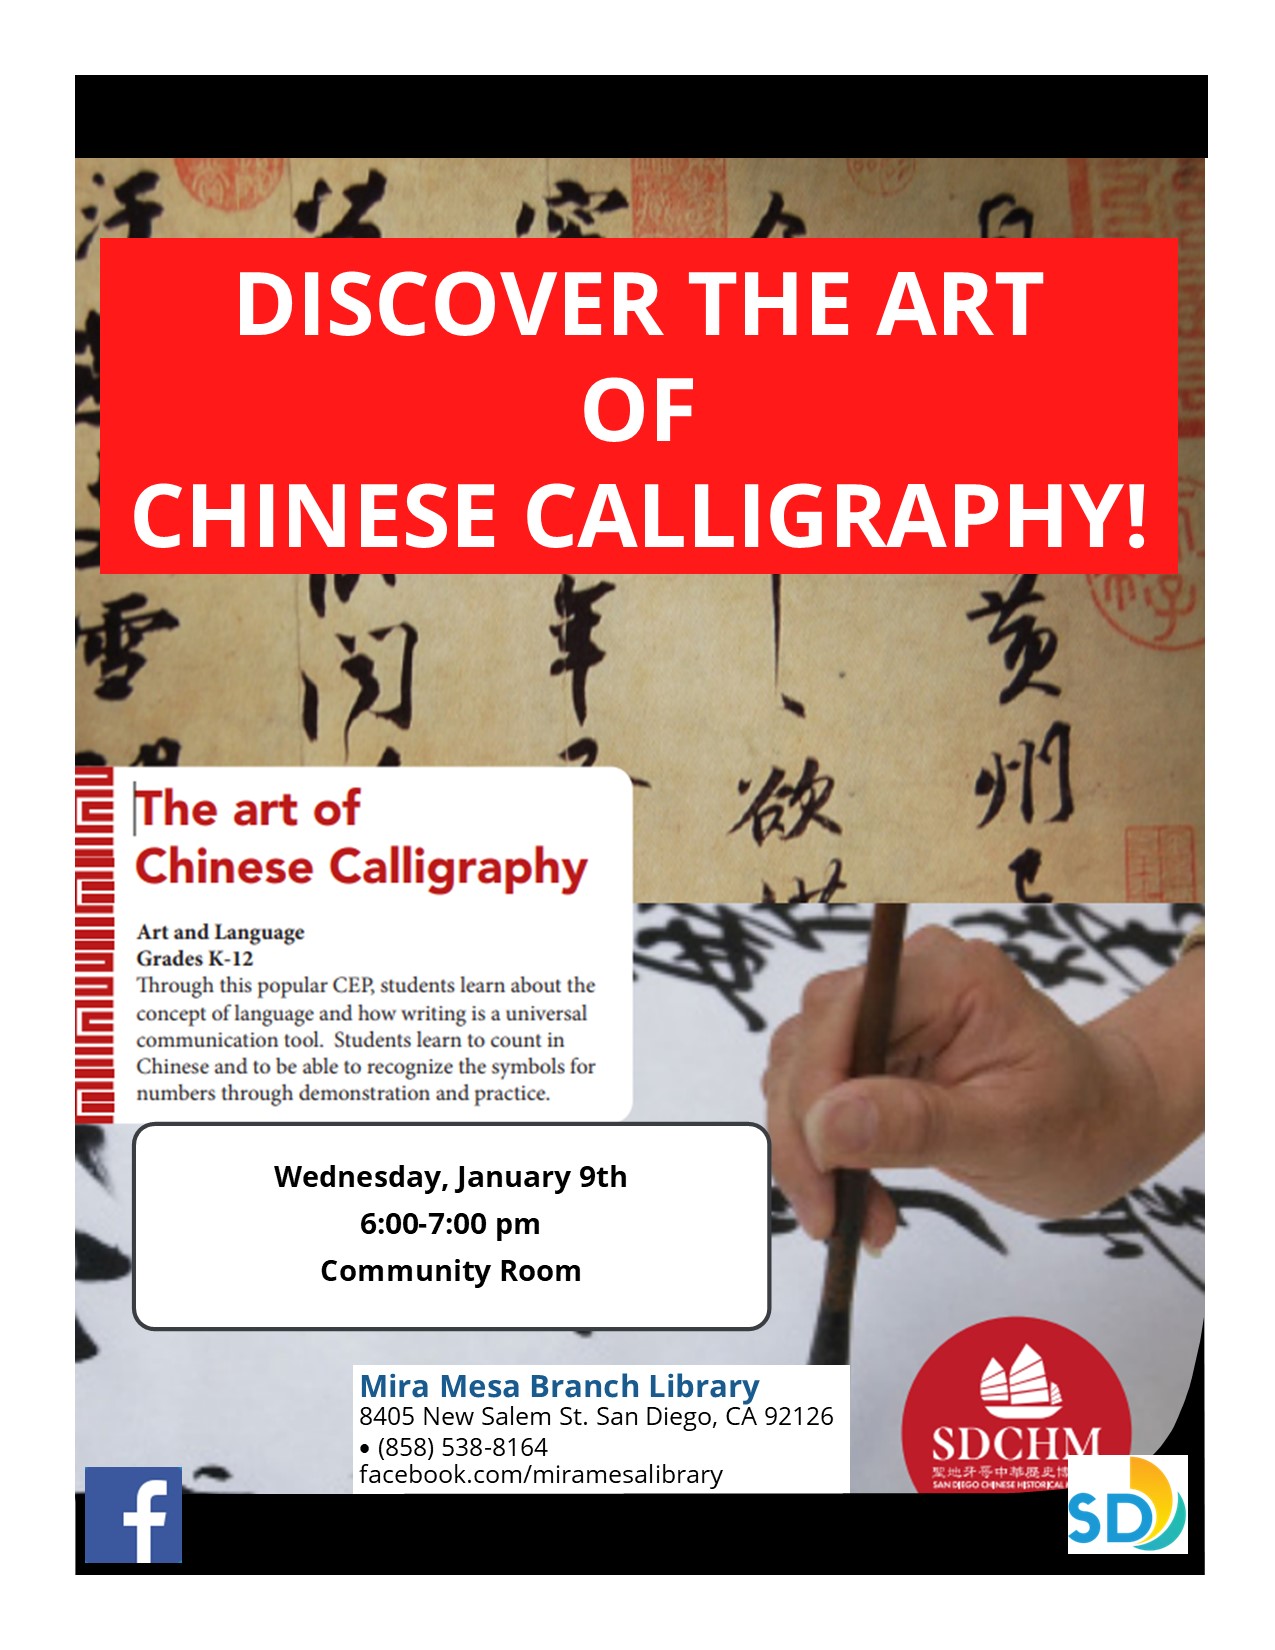 Flyer with hand using brush to write in Chinese Calligraphy